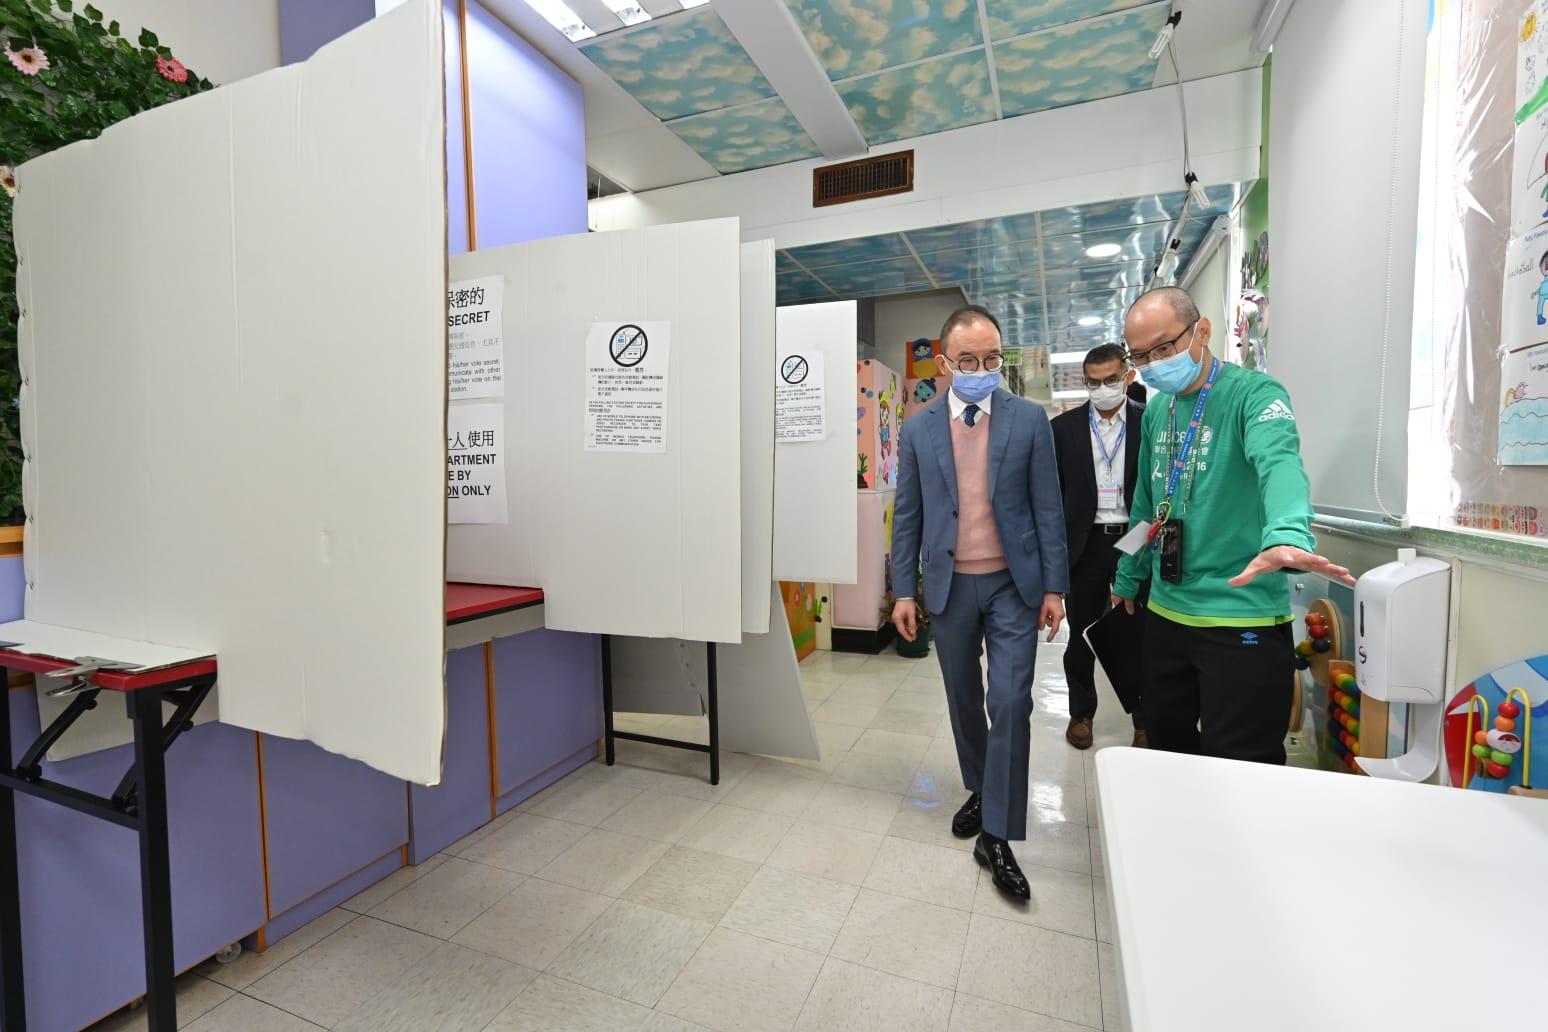 The Secretary for Constitutional and Mainland Affairs, Mr Erick Tsang Kwok-wai, today (December 18) visited various polling stations to inspect the preparatory work and rehearsal sessions for the Legislative Council General Election. Photo shows Mr Tsang (left) being briefed on the design of the voting compartments by electoral staff at the polling station at St Anna Anglo-Chinese Kindergarten in Quarry Bay.